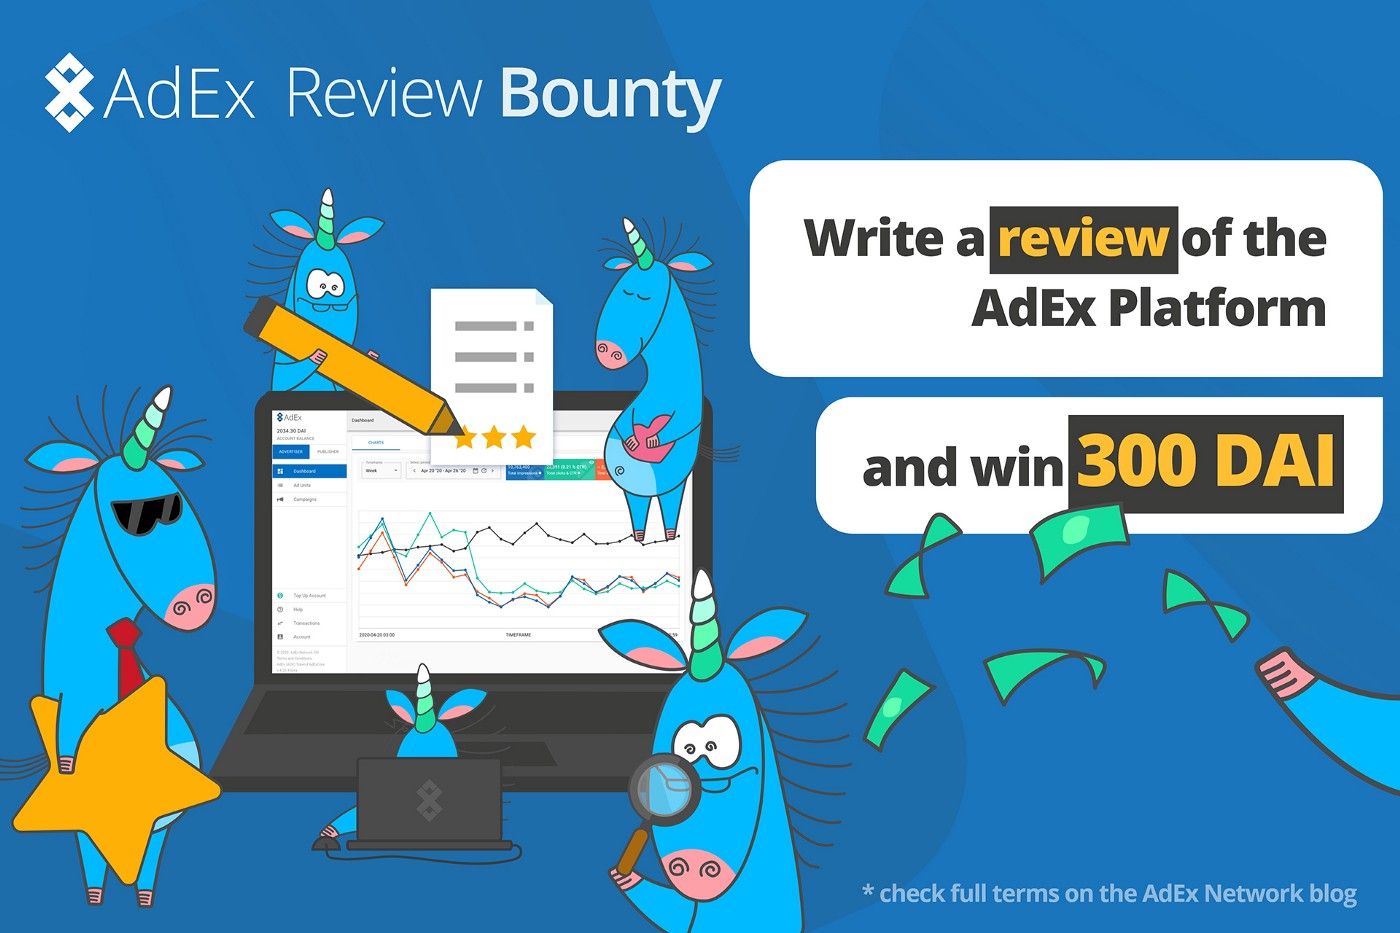 AdEx Review Bounty: Write about the AdEx Platform and earn 300 DAI*